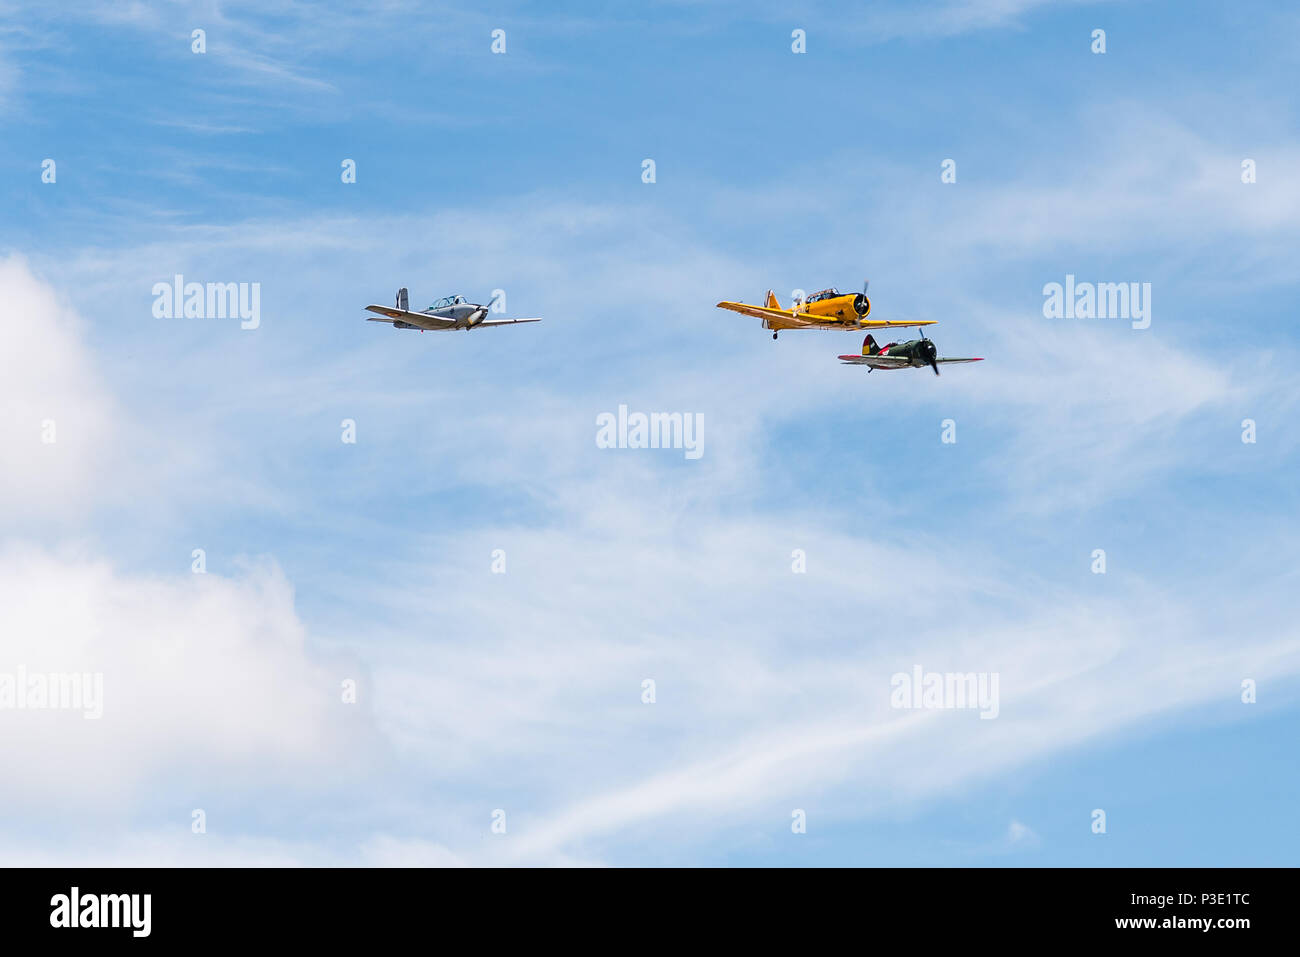 Madrid, Spain - June 3, 2018:  Formation flying of Policarpov I-16, North American T-6 Texan DUN and Beechcraft T-34A Mentor during air show of histor Stock Photo